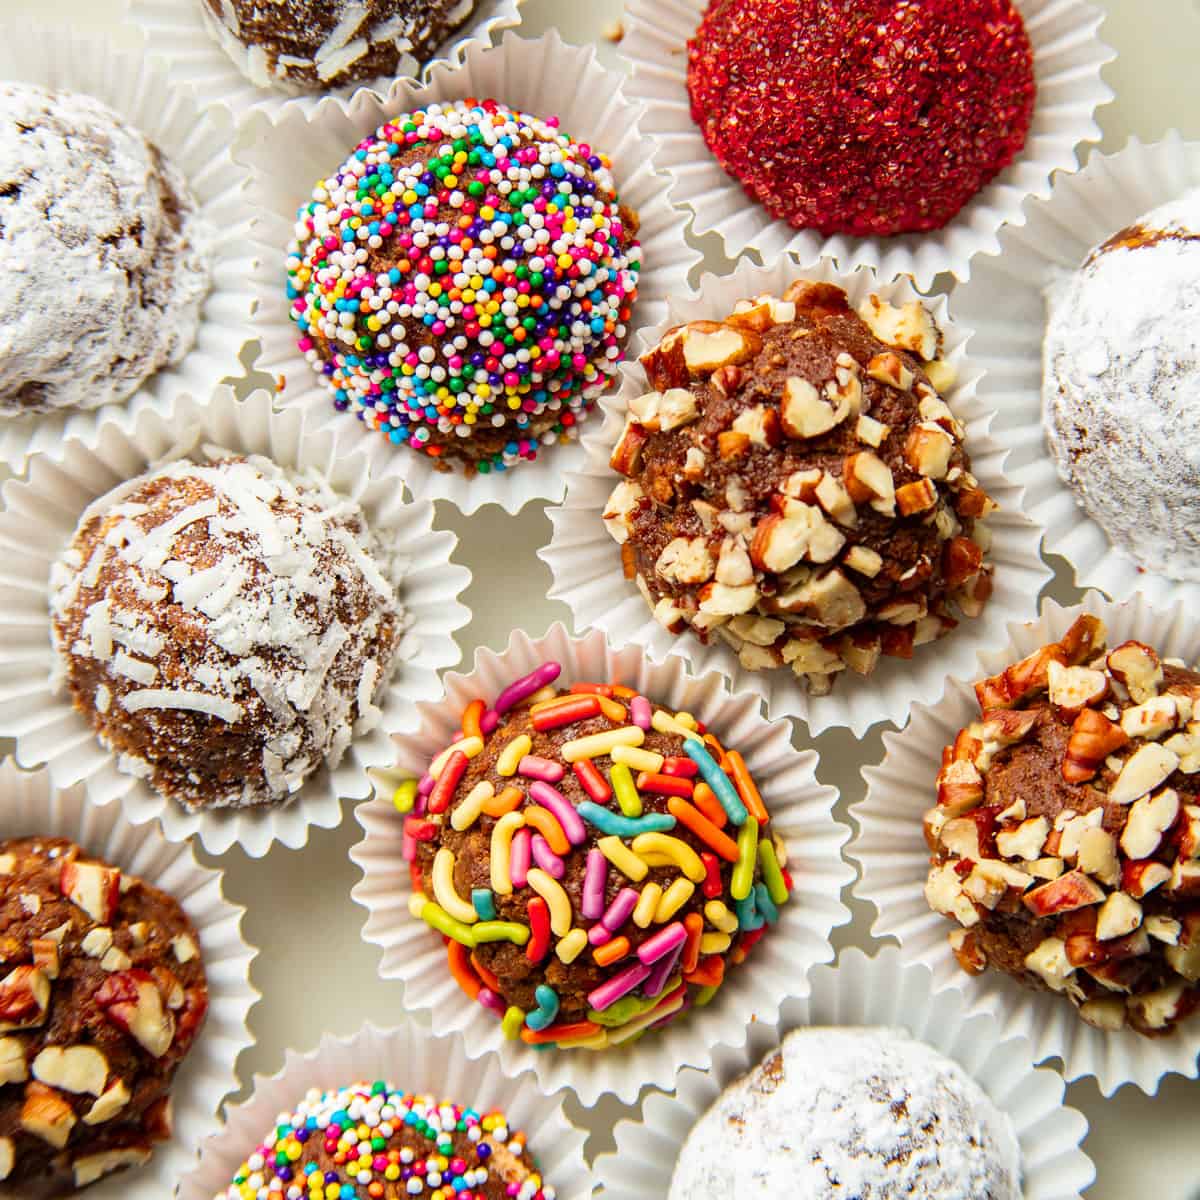 Vegan Rum Balls with various toppings on a white surface.